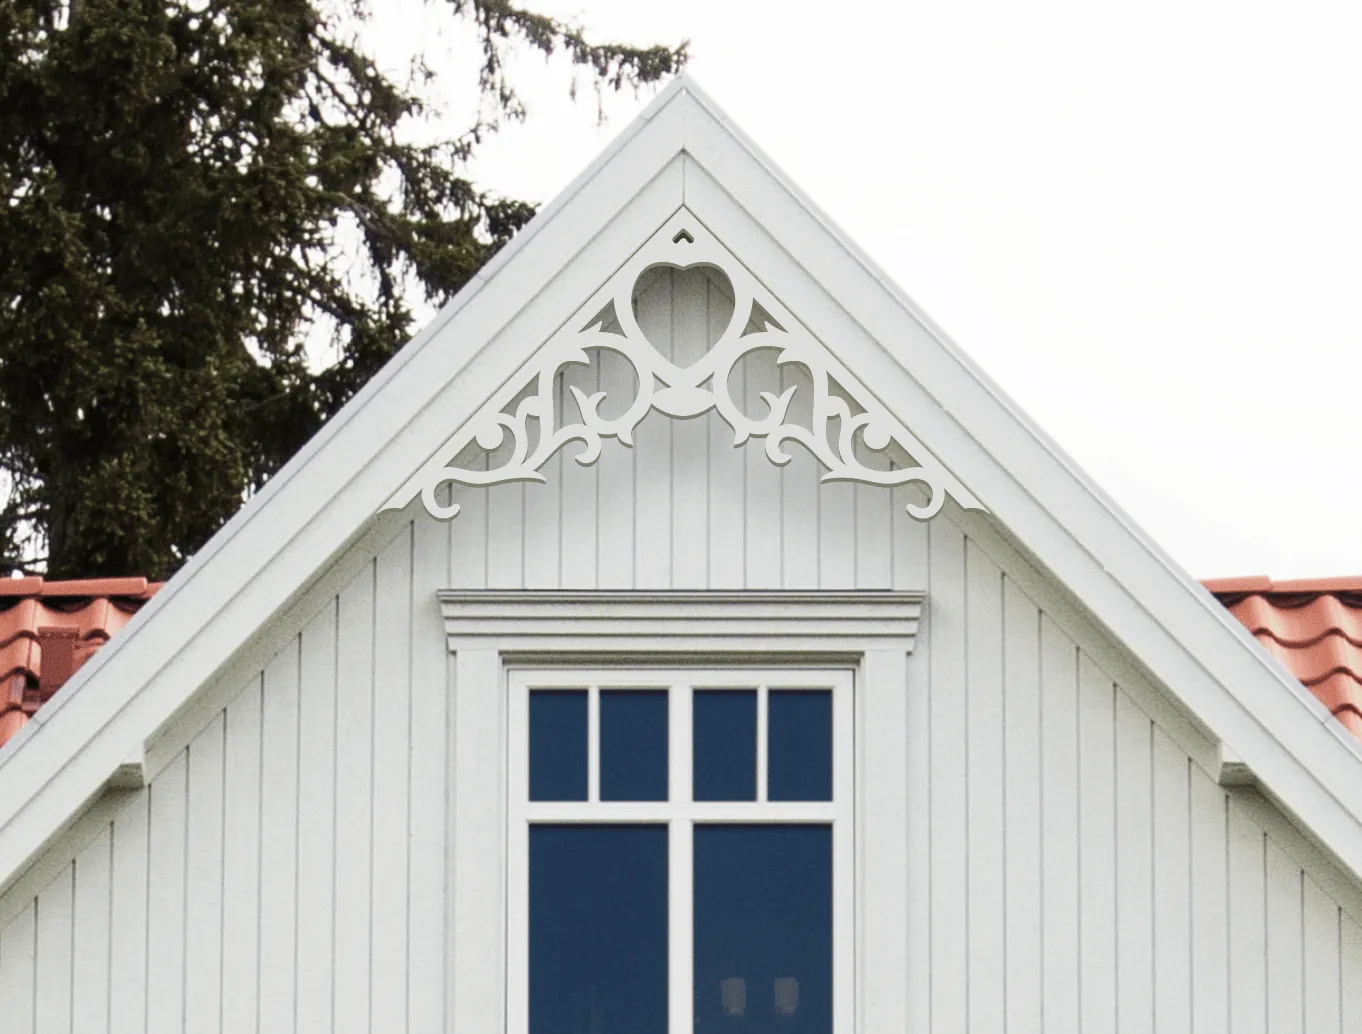 Gable pediment 002 - A white house with decorative wooden victorian millwork as house decoration for roof and gable end.